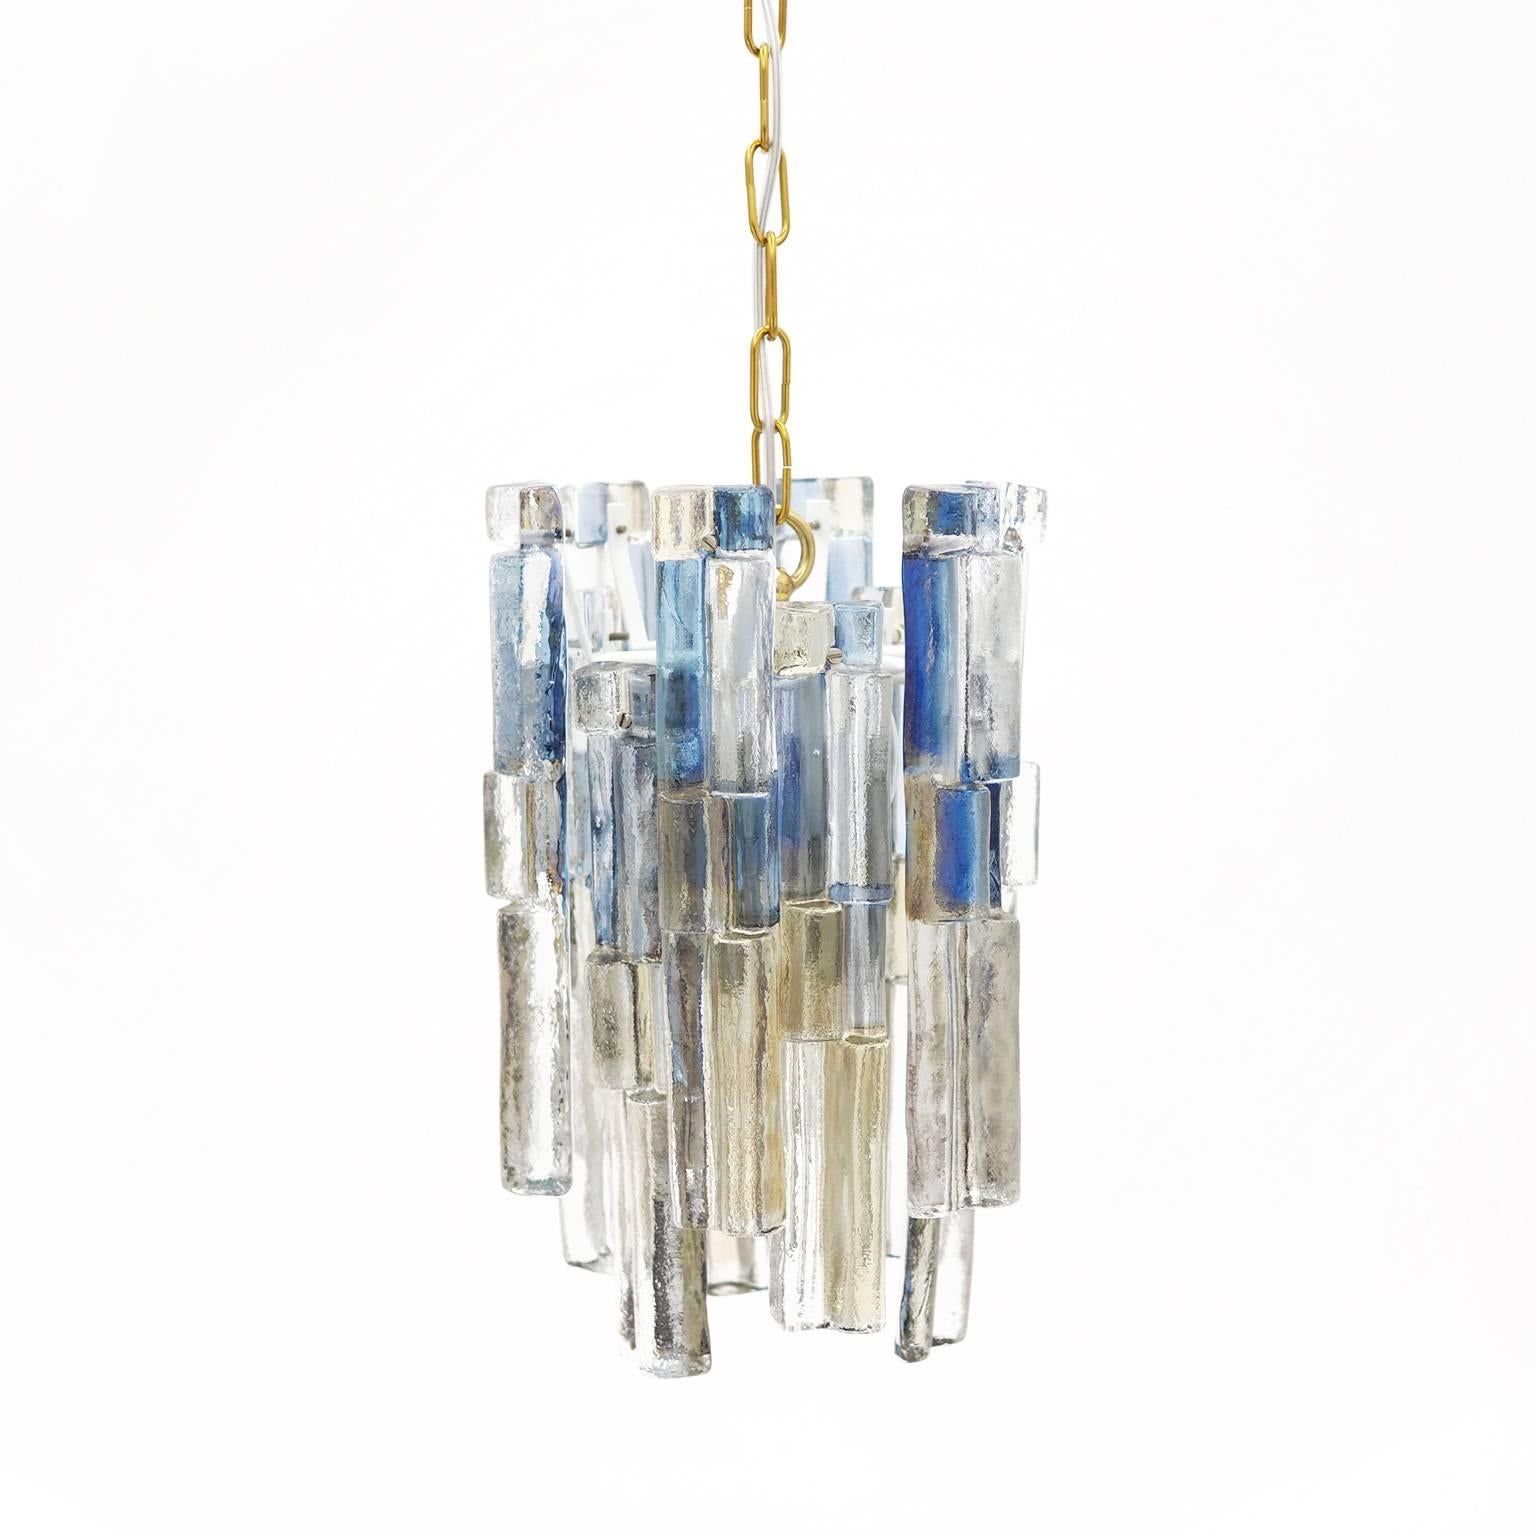 Exceptional and very rare multicolored Kalmar chandelier. 12 large textured tinted glass elements are mounted on a white lacquered steel body suspended by a brass chain and canopy (with manufacturers label). There a six E14 Sockets (40W max each) to